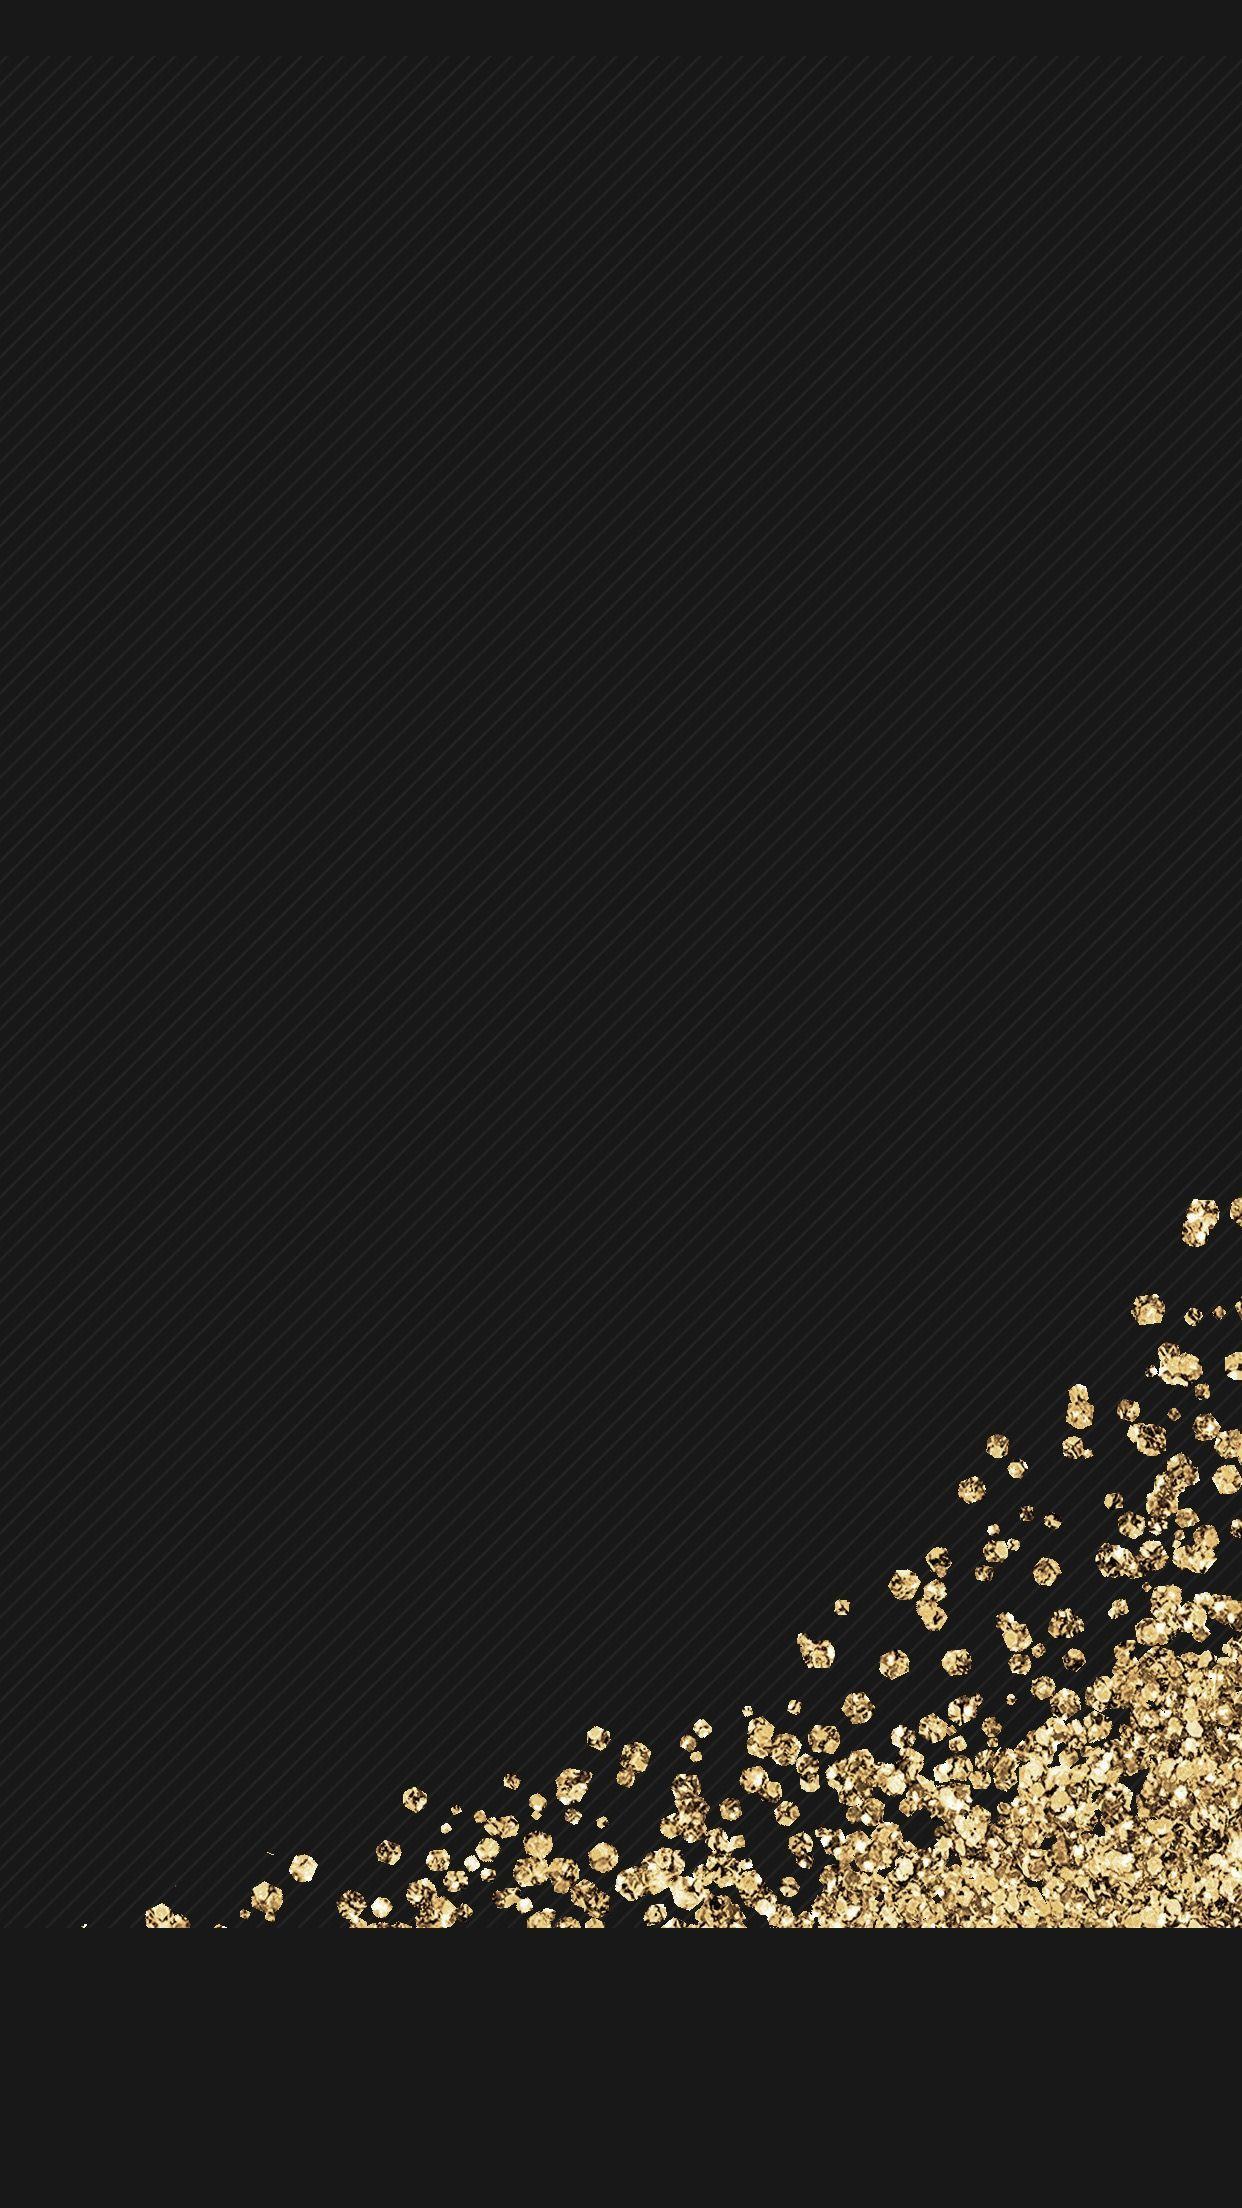 black, gold, glitter, wallpaper, background, iphone, android